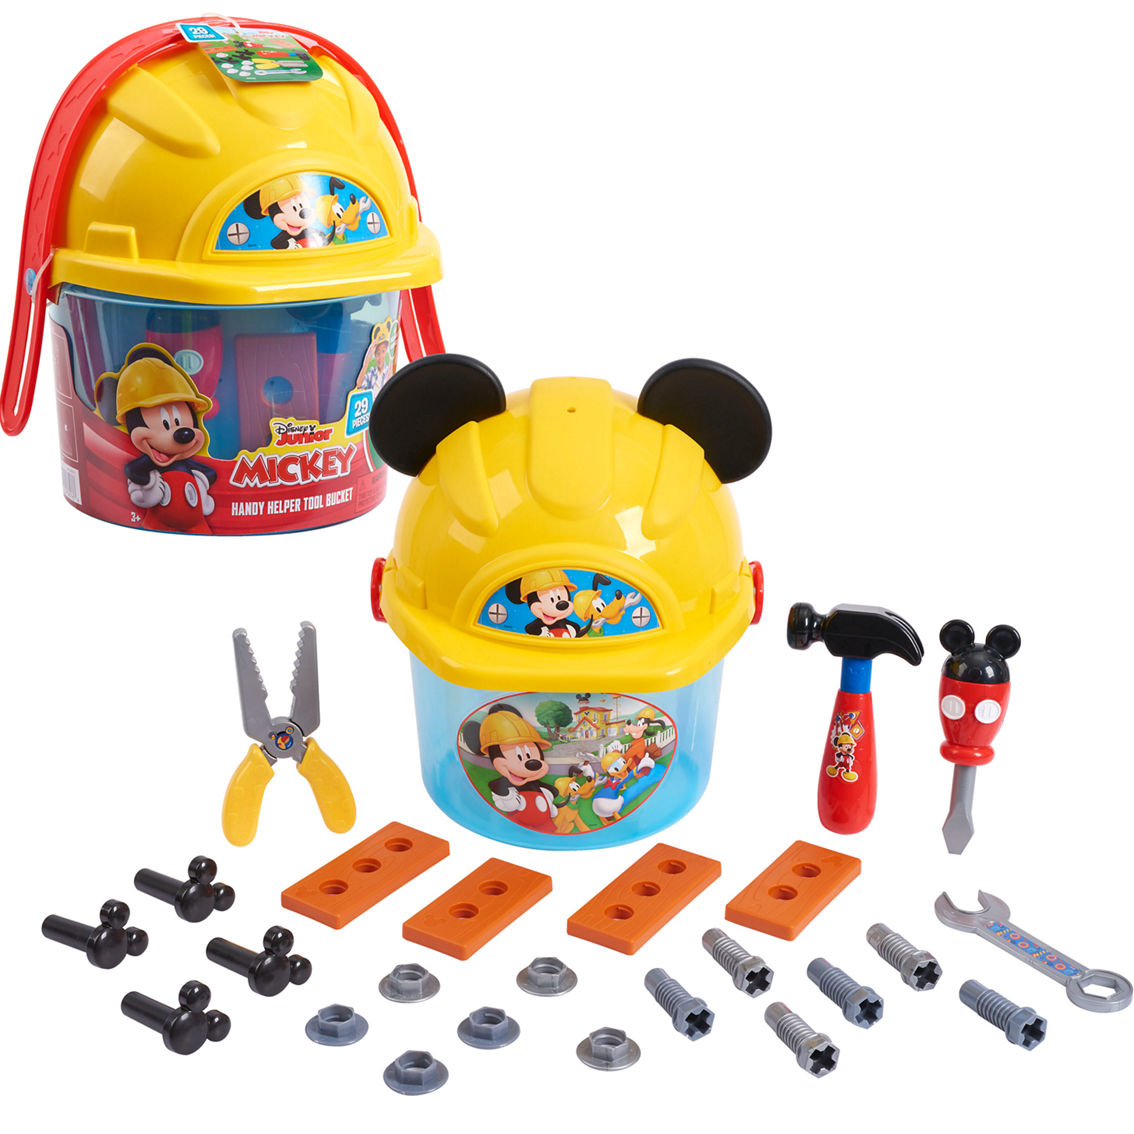 Just Play Mickey Mouse Handy Helper Tool Bucket - Image 3 of 5